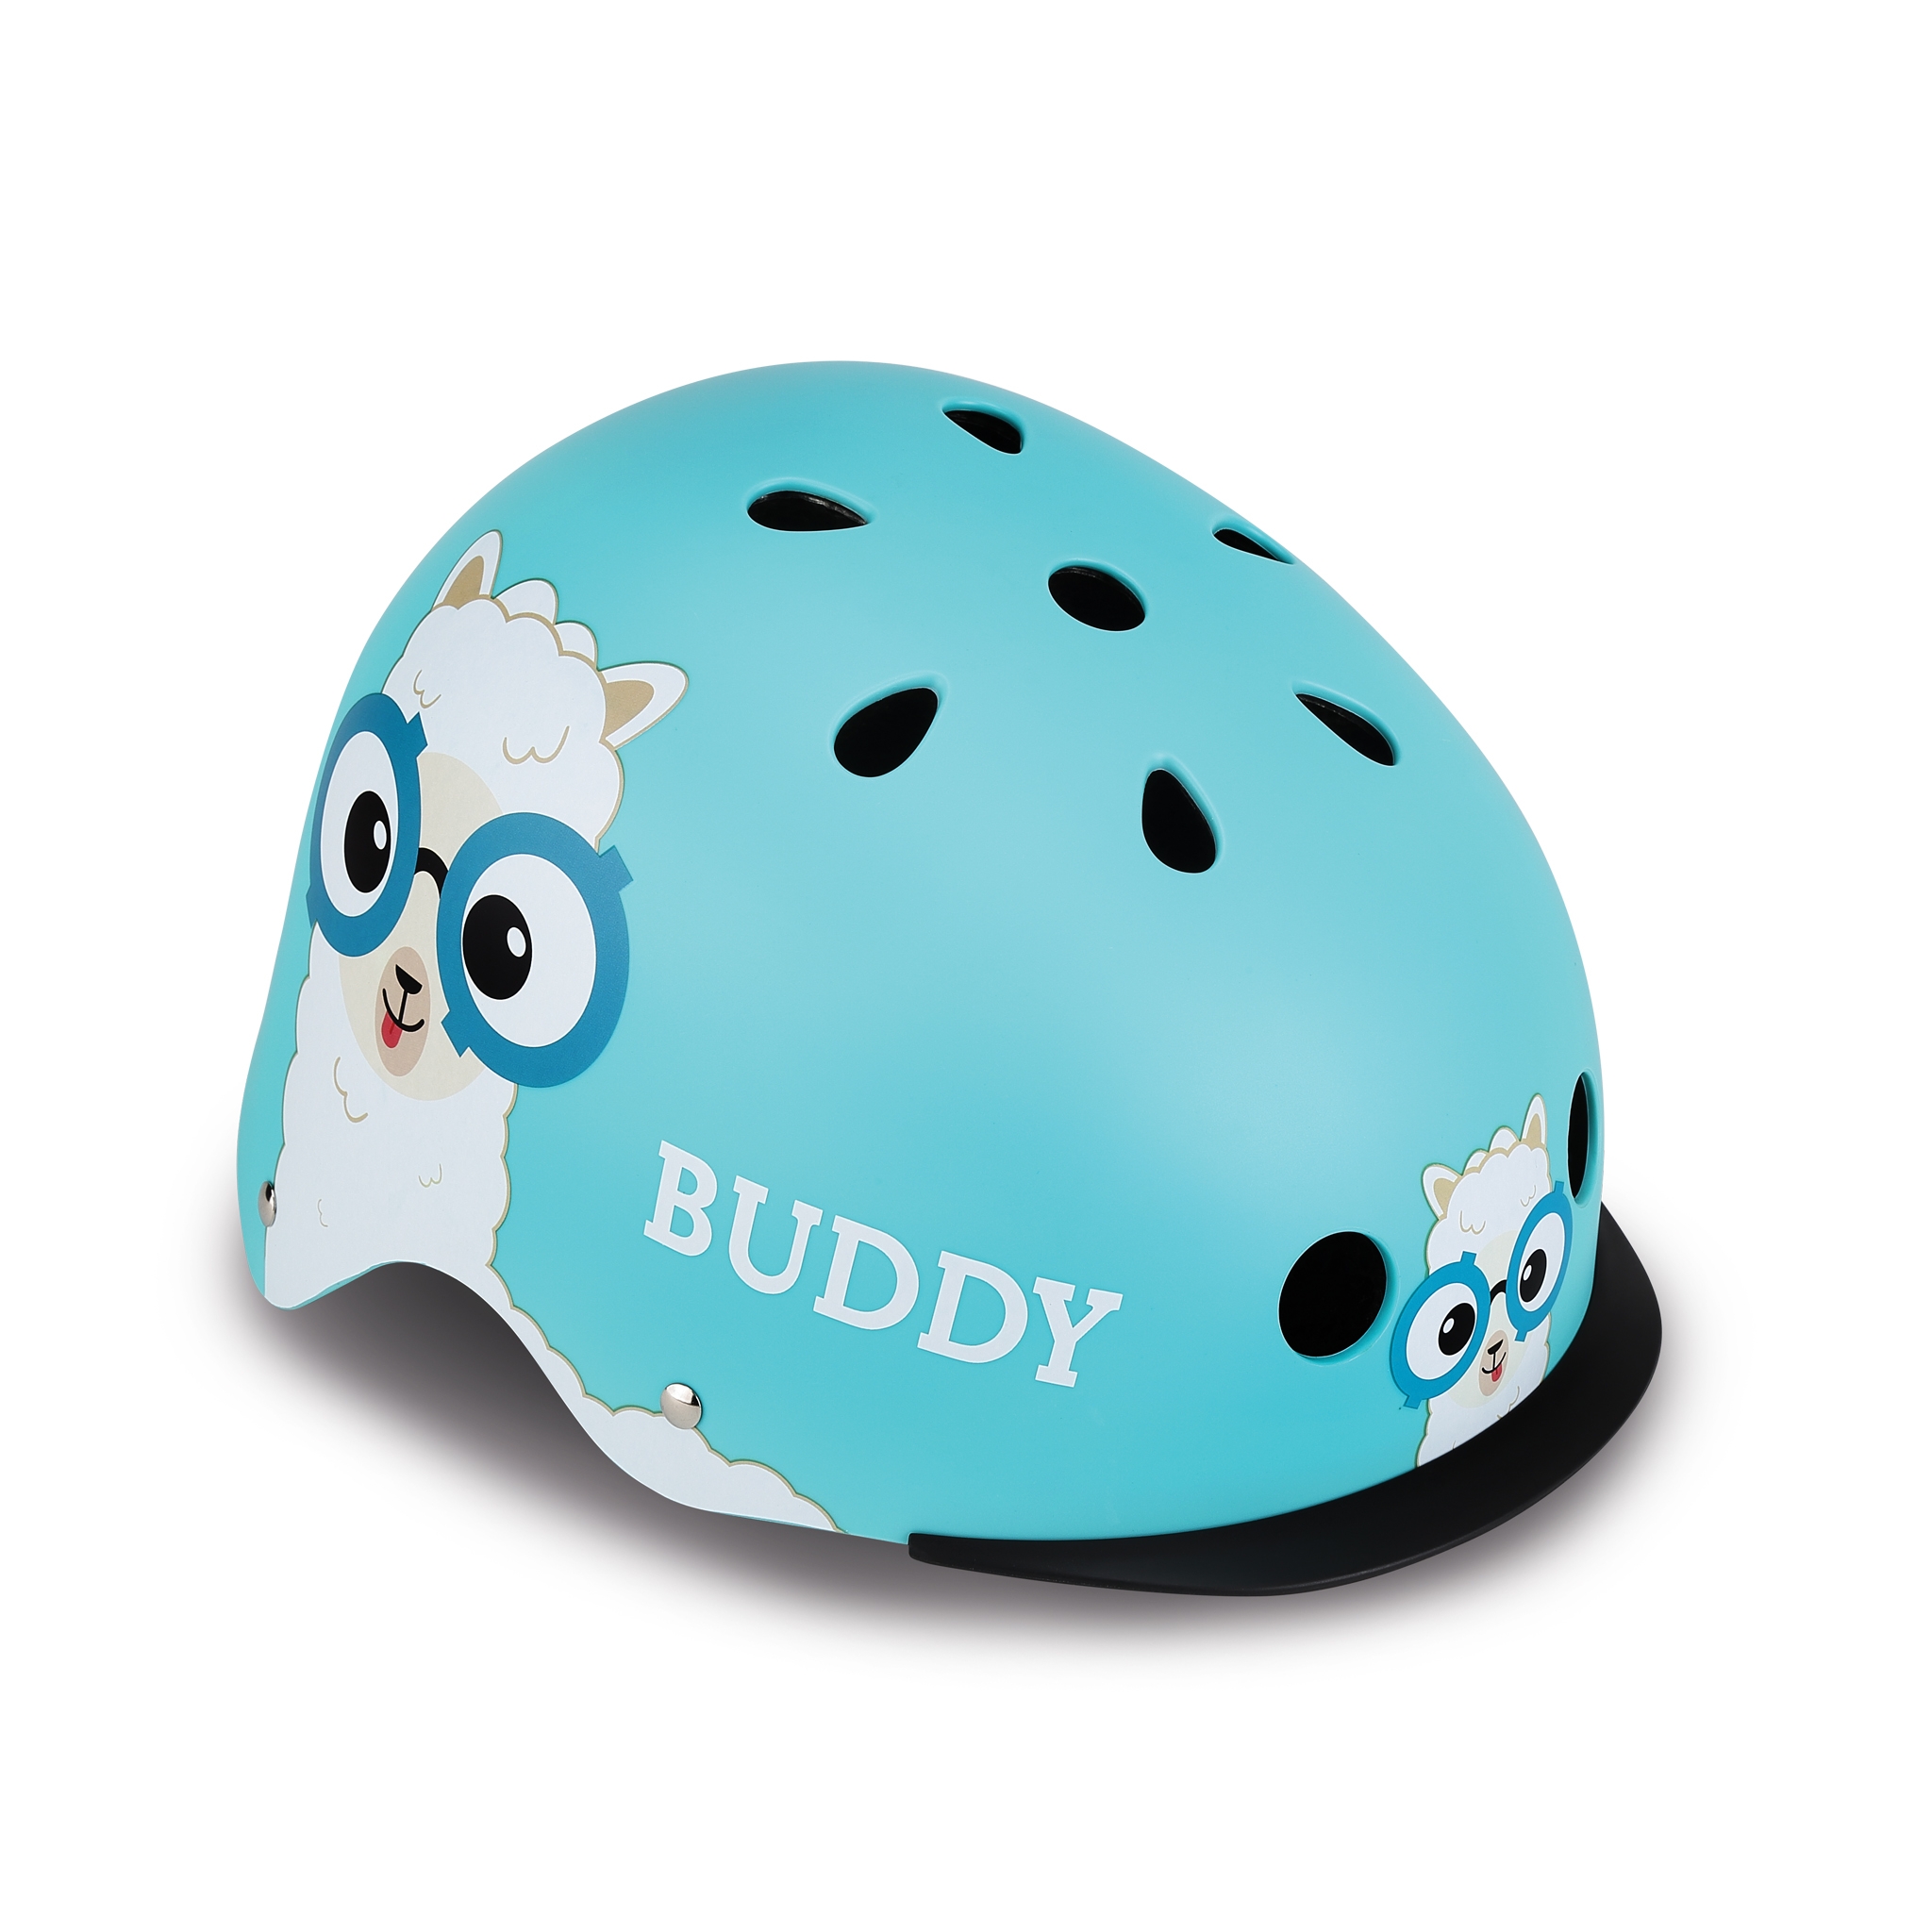 ELITE-helmets-scooter-helmets-for-kids-in-mold-polycarbonate-outer-shell-blue 0